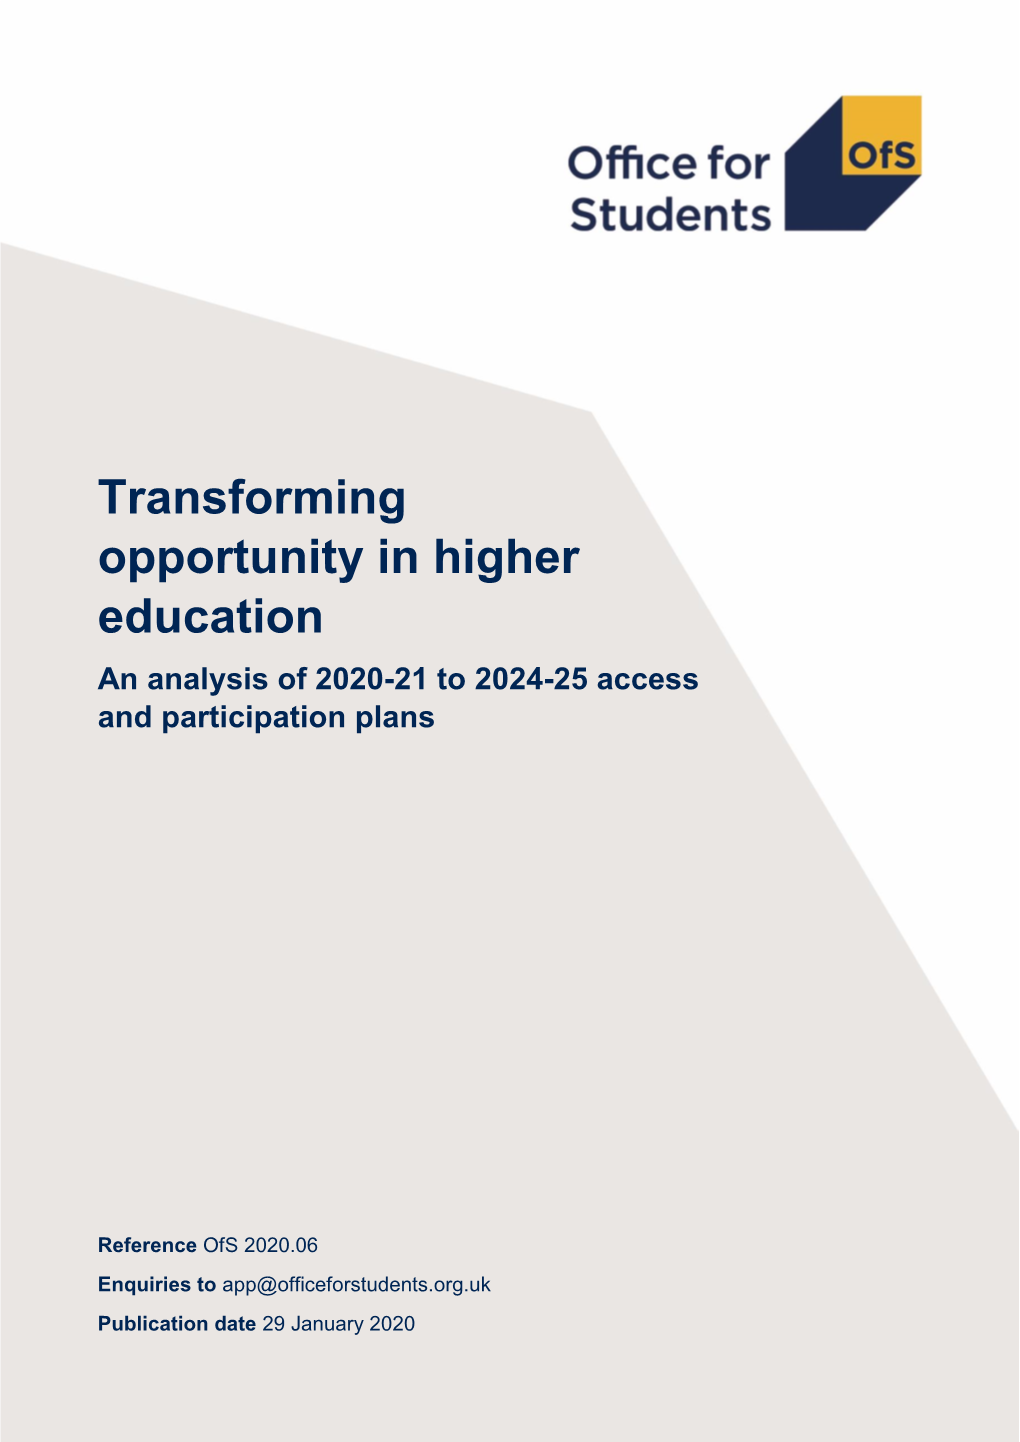 Transforming Opportunity in Higher Education an Analysis of 2020-21 to 2024-25 Access and Participation Plans